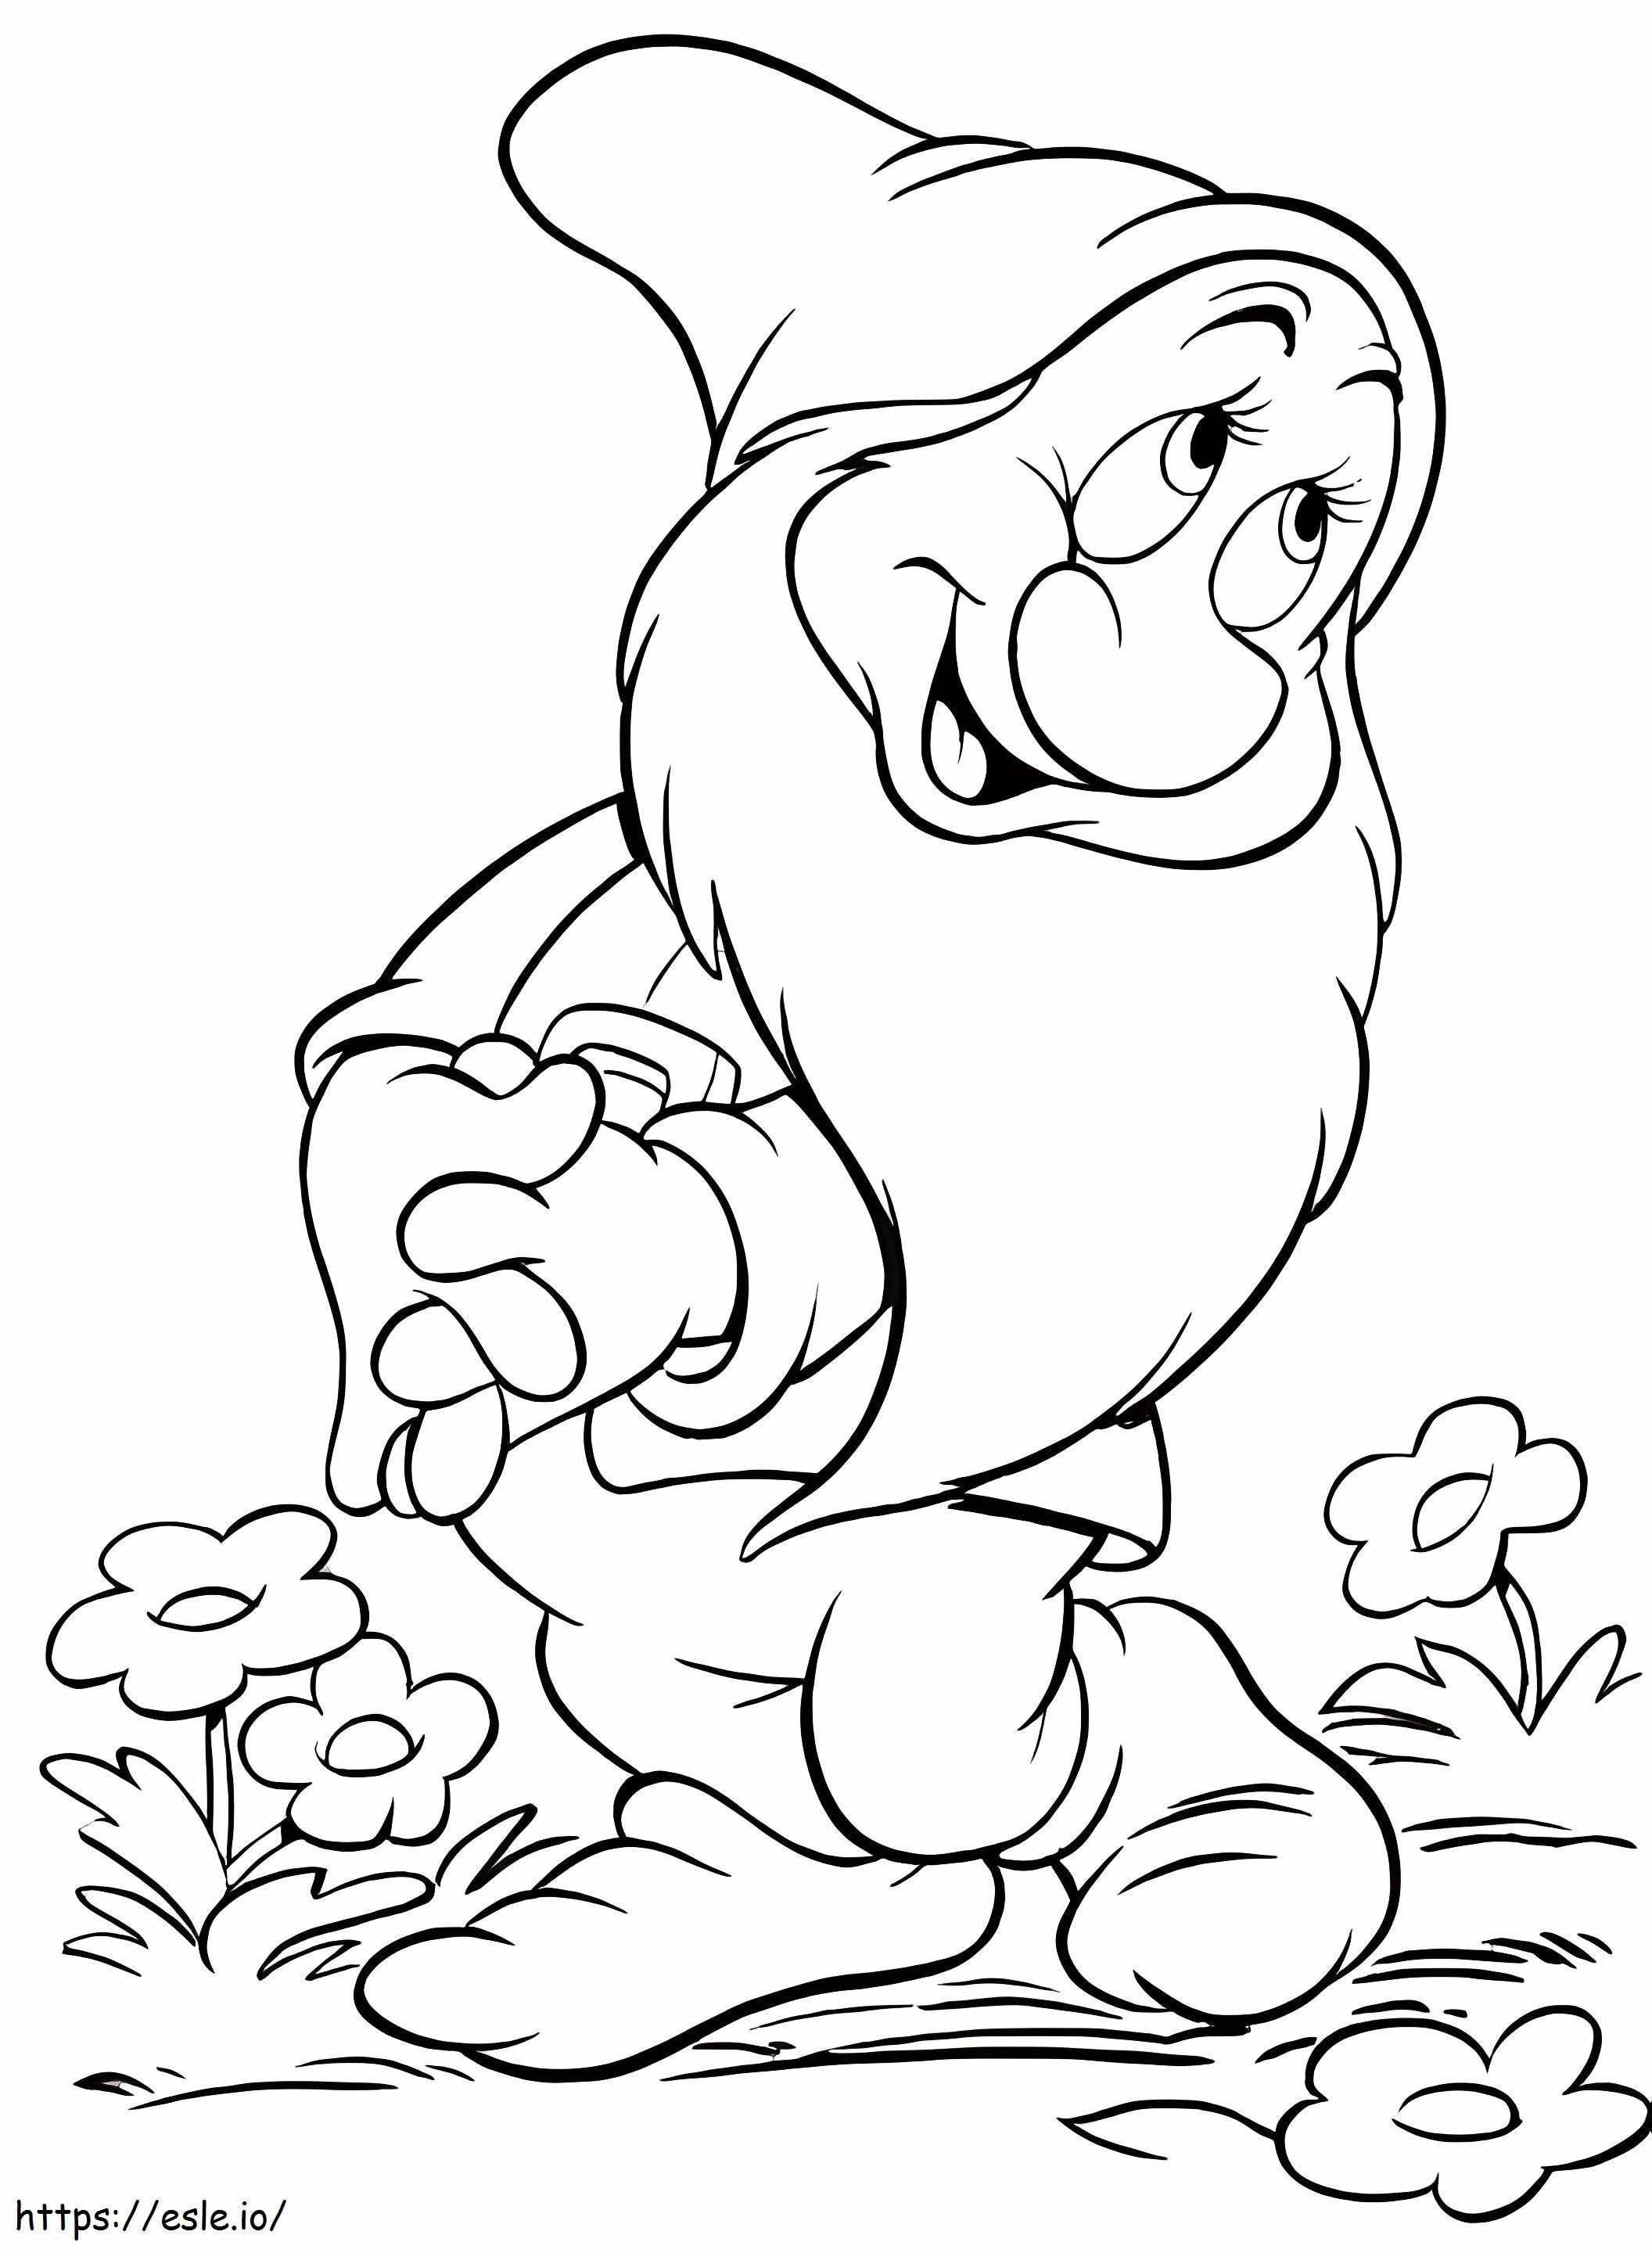 Dwarf With Flower coloring page